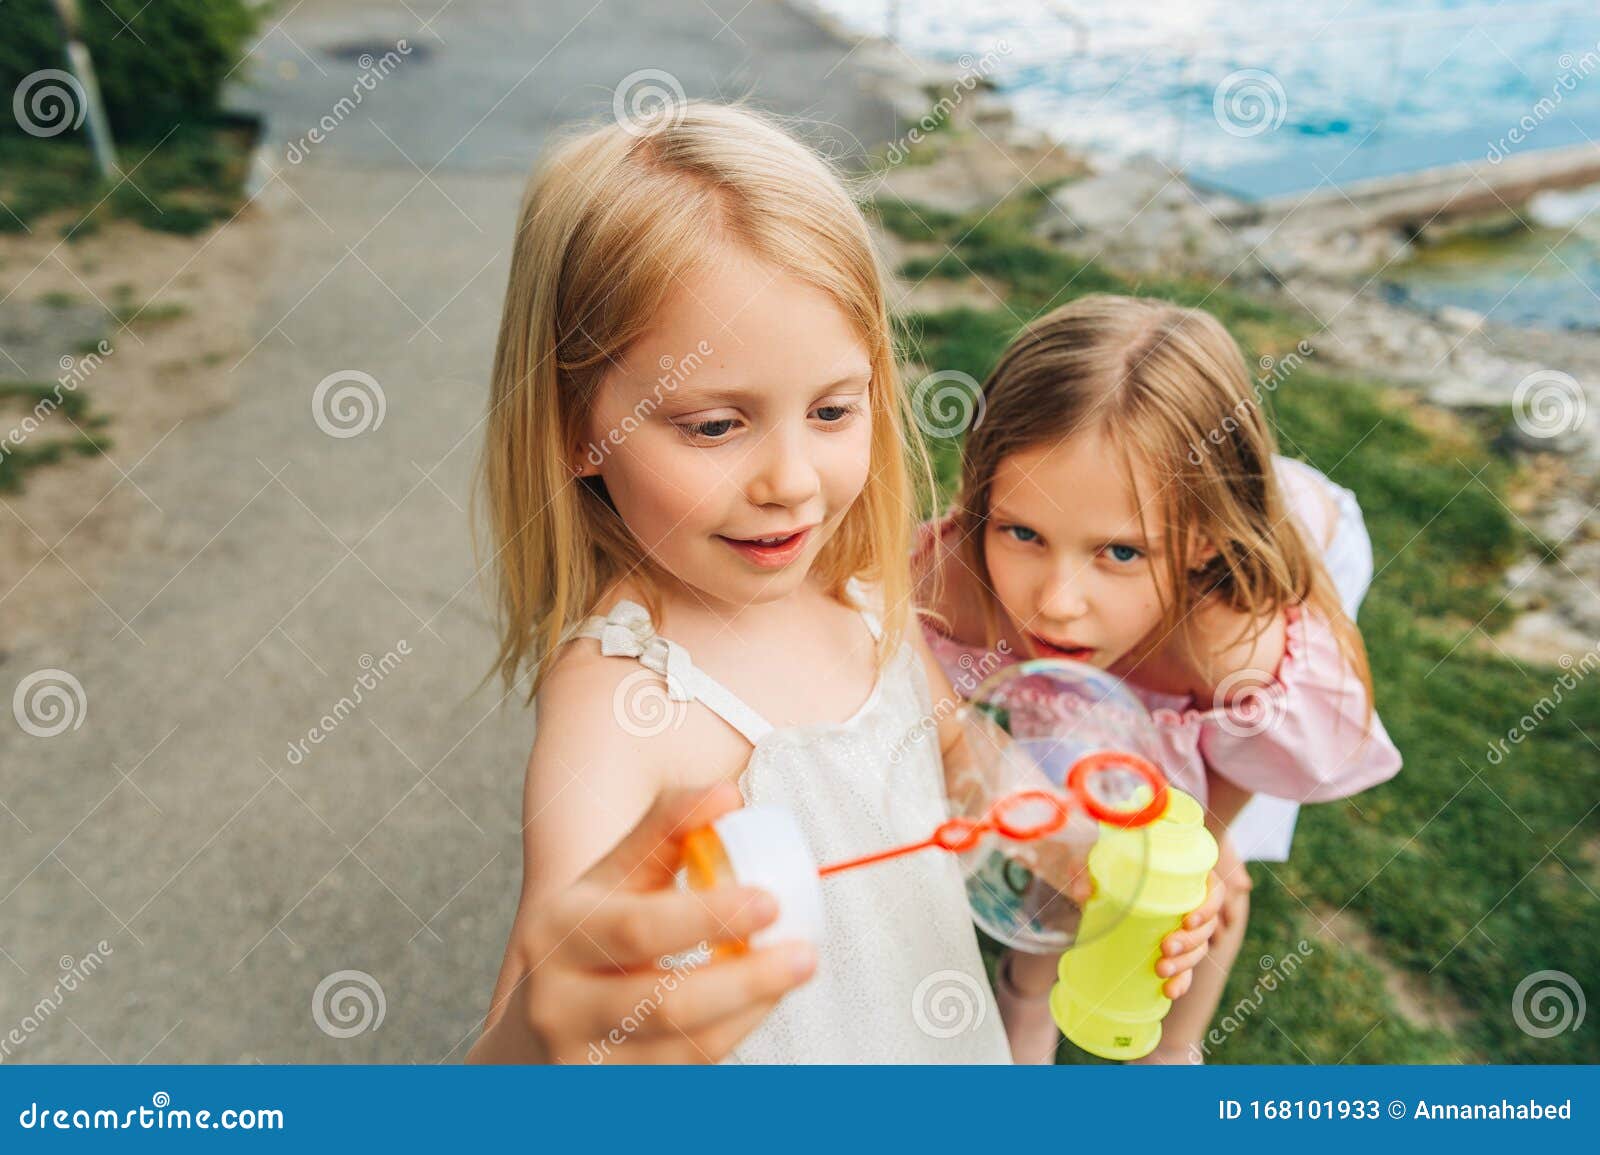 Outdoor Portrait Of Two Sweet Little Girls Stock Image Image Of Happy